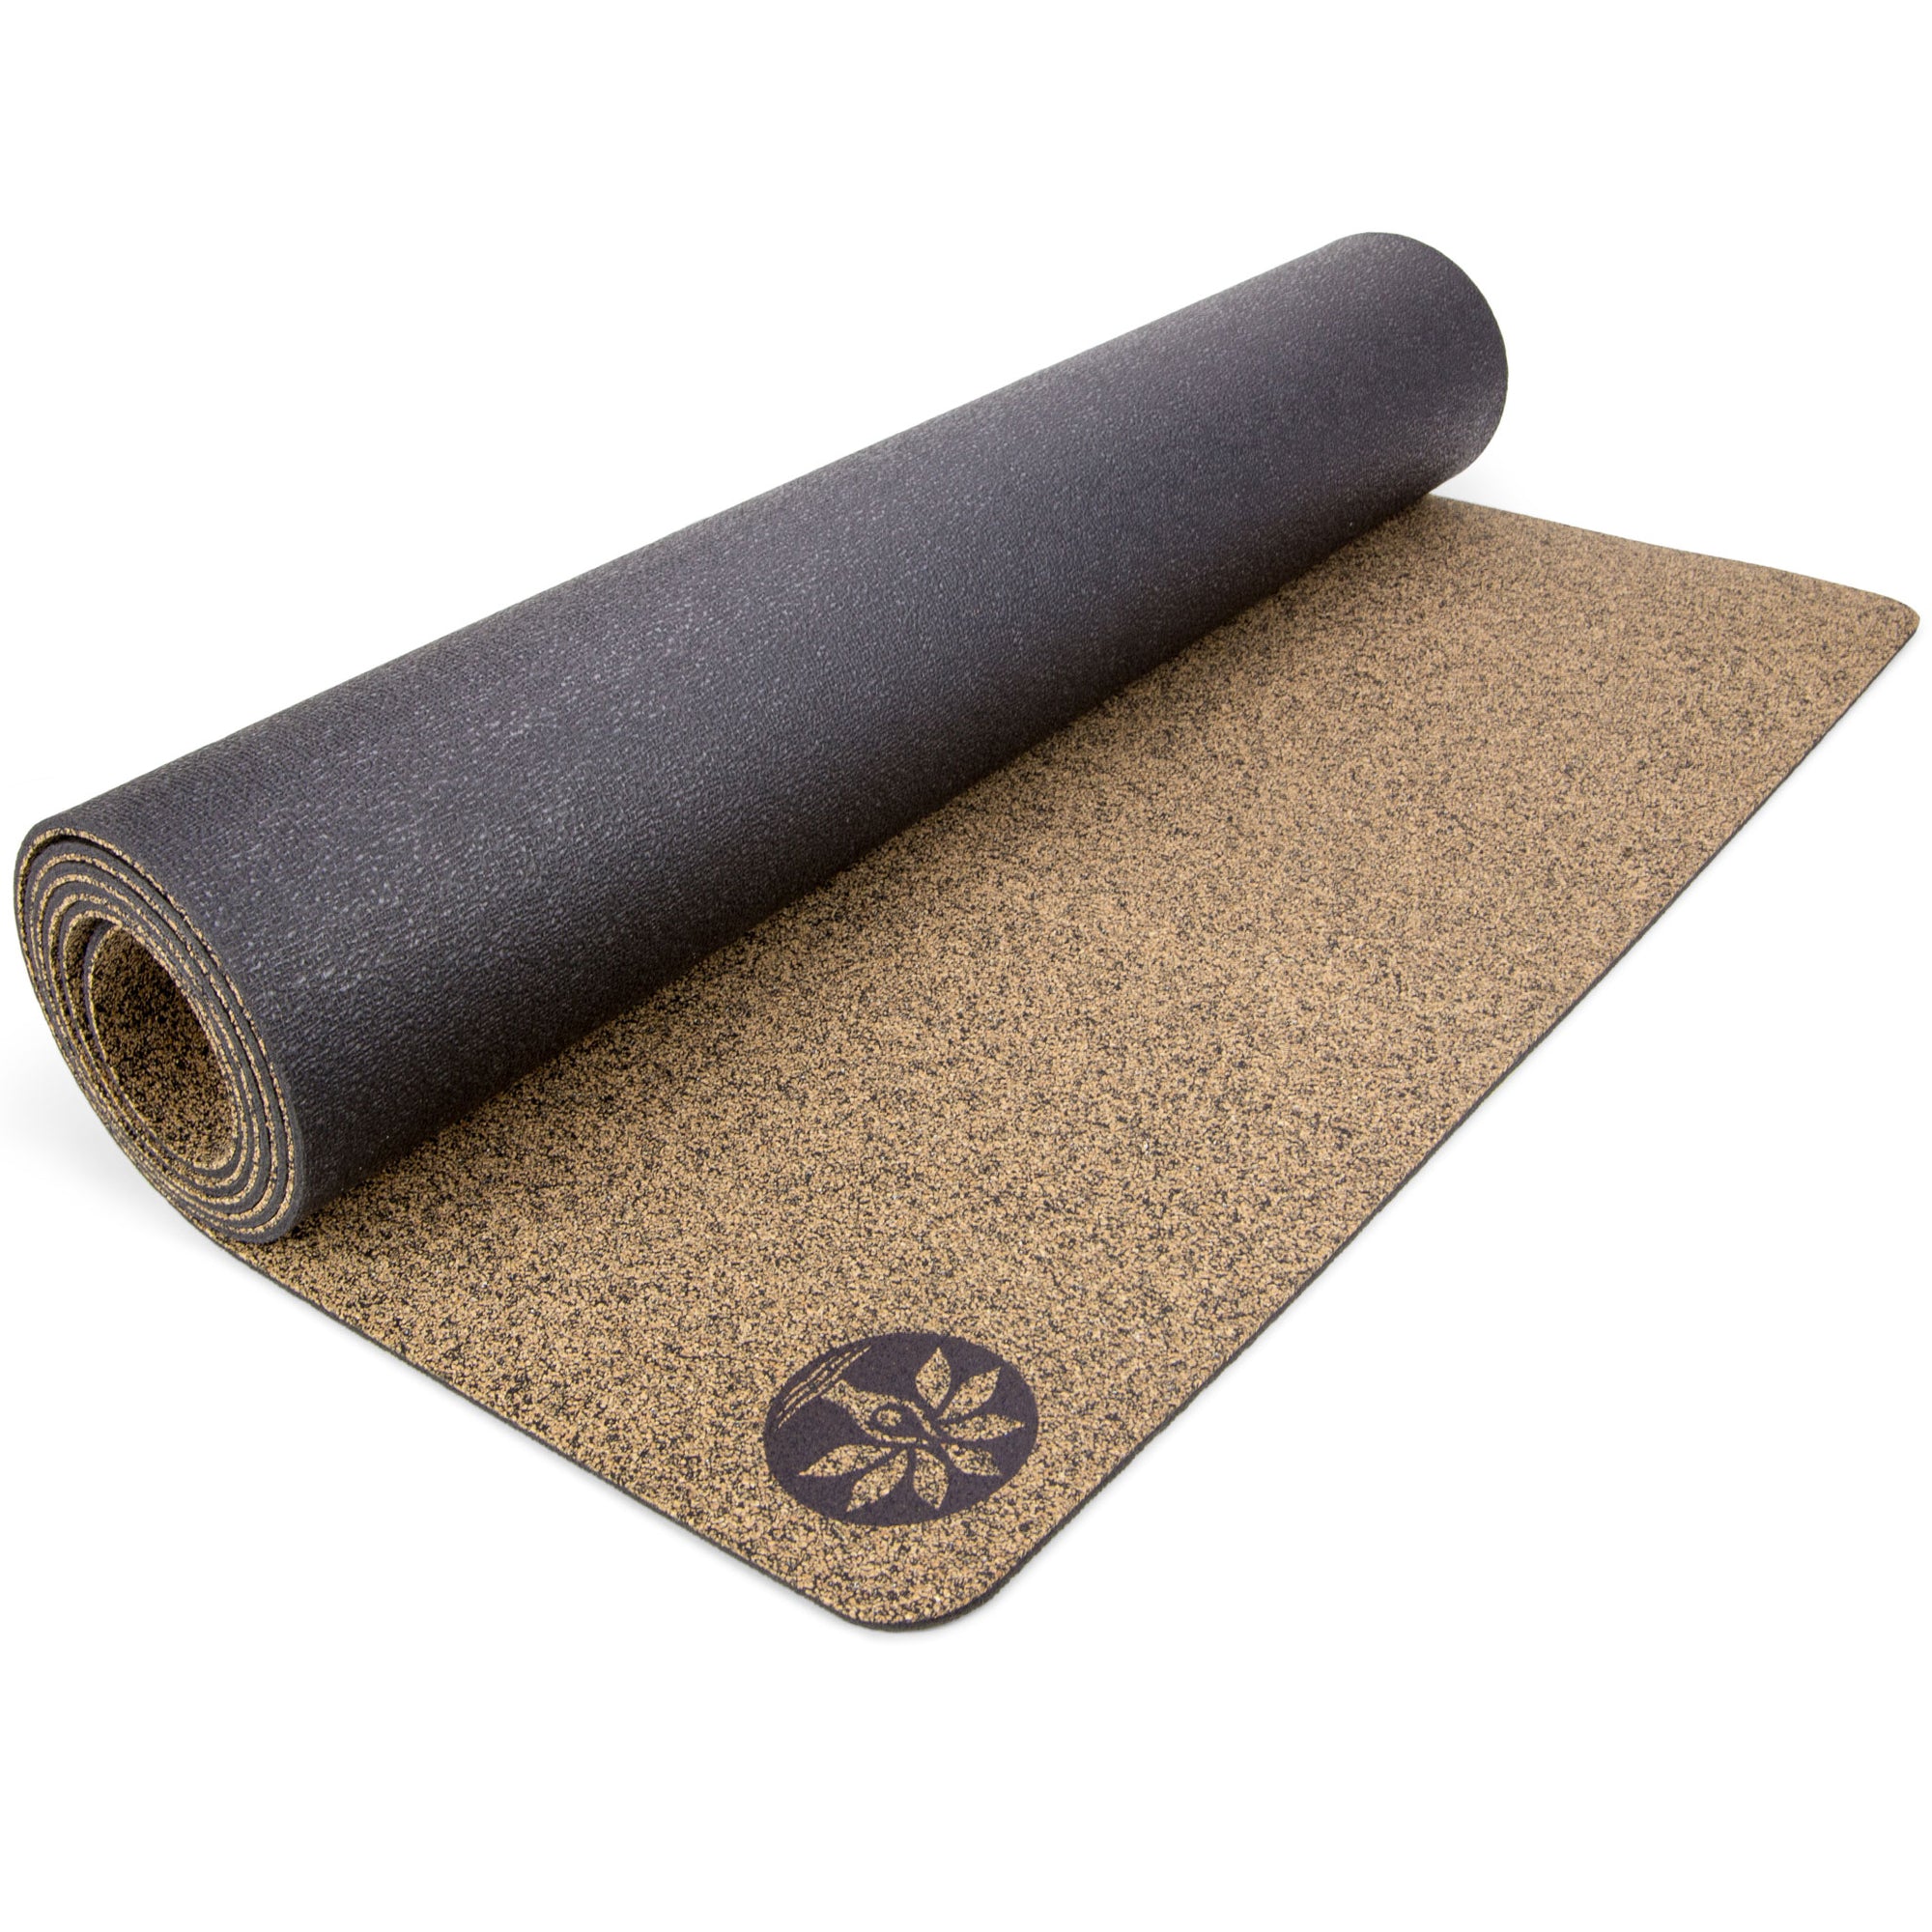 This hidden gem yoga mat is incredible value in the Black Friday